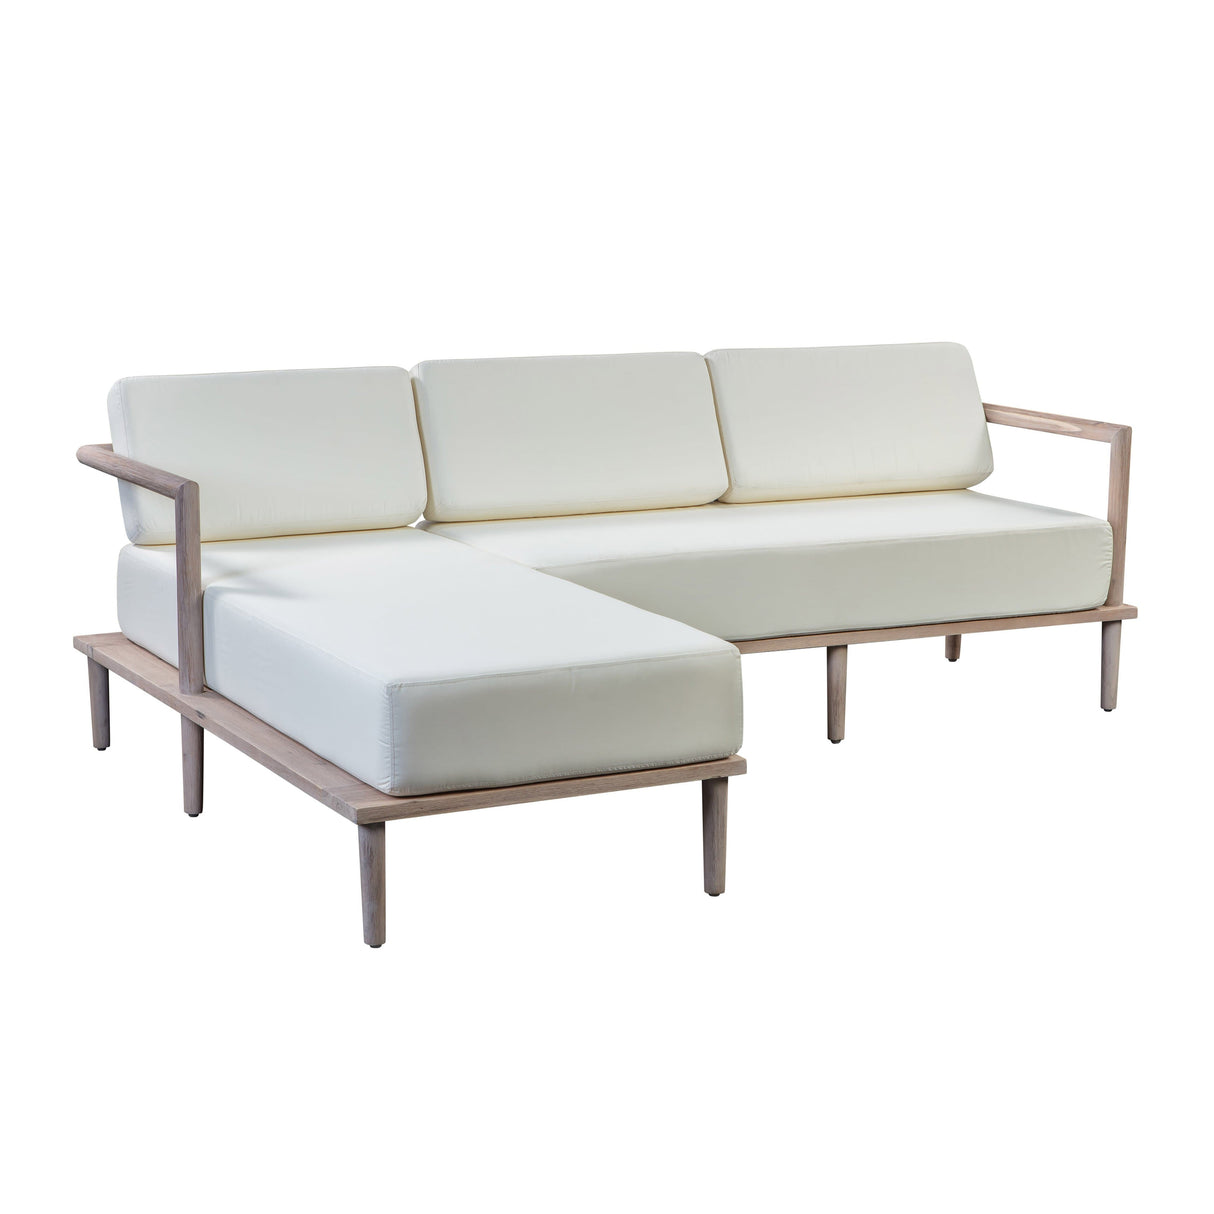 Candelabra Home Emerson Cream Outdoor Sectional Furniture